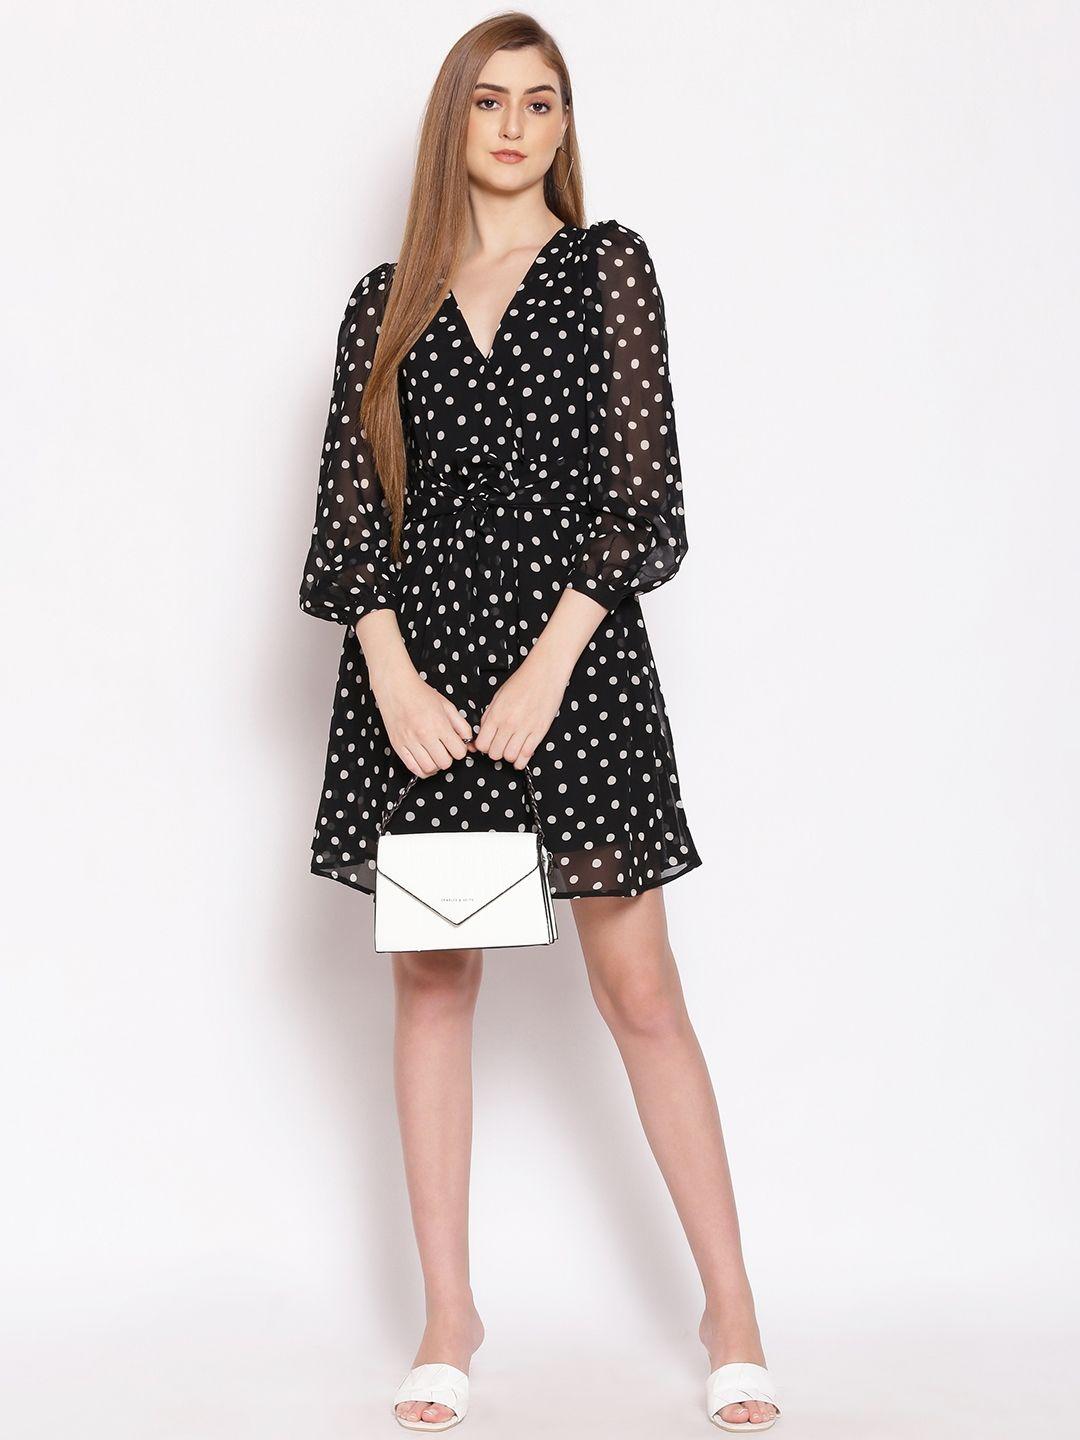 oxolloxo black printed fit & flare dress